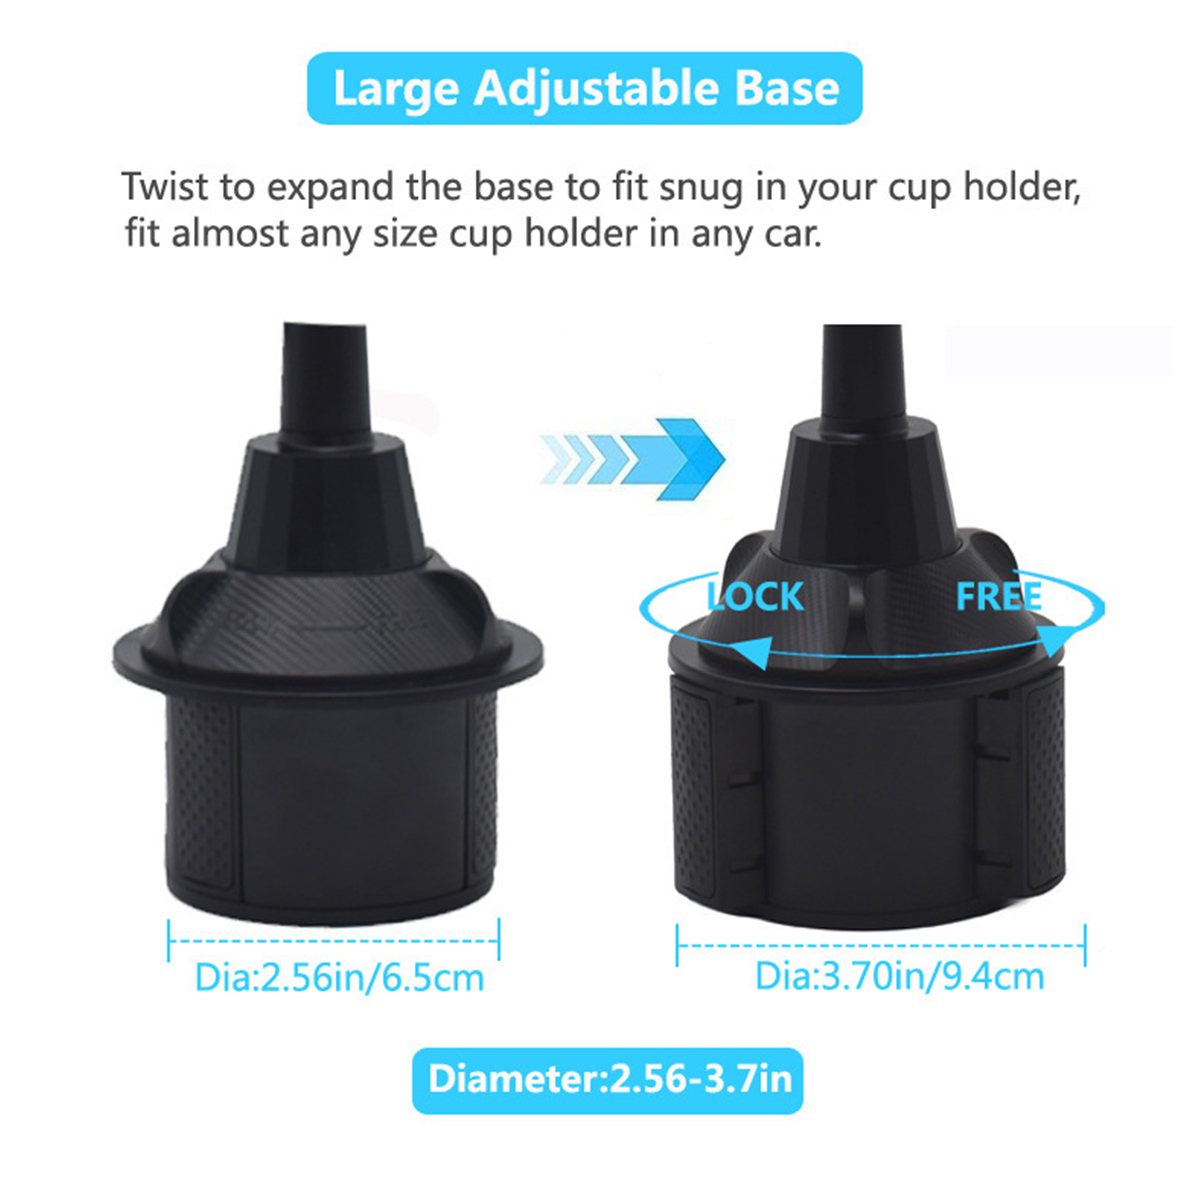 Universal-360-Rotation-Car-Phone-Mount-Gooseneck-Cup-Holder-for-5-95cm-Width-Cell-Phone-for-iPhone-1-1720314-5